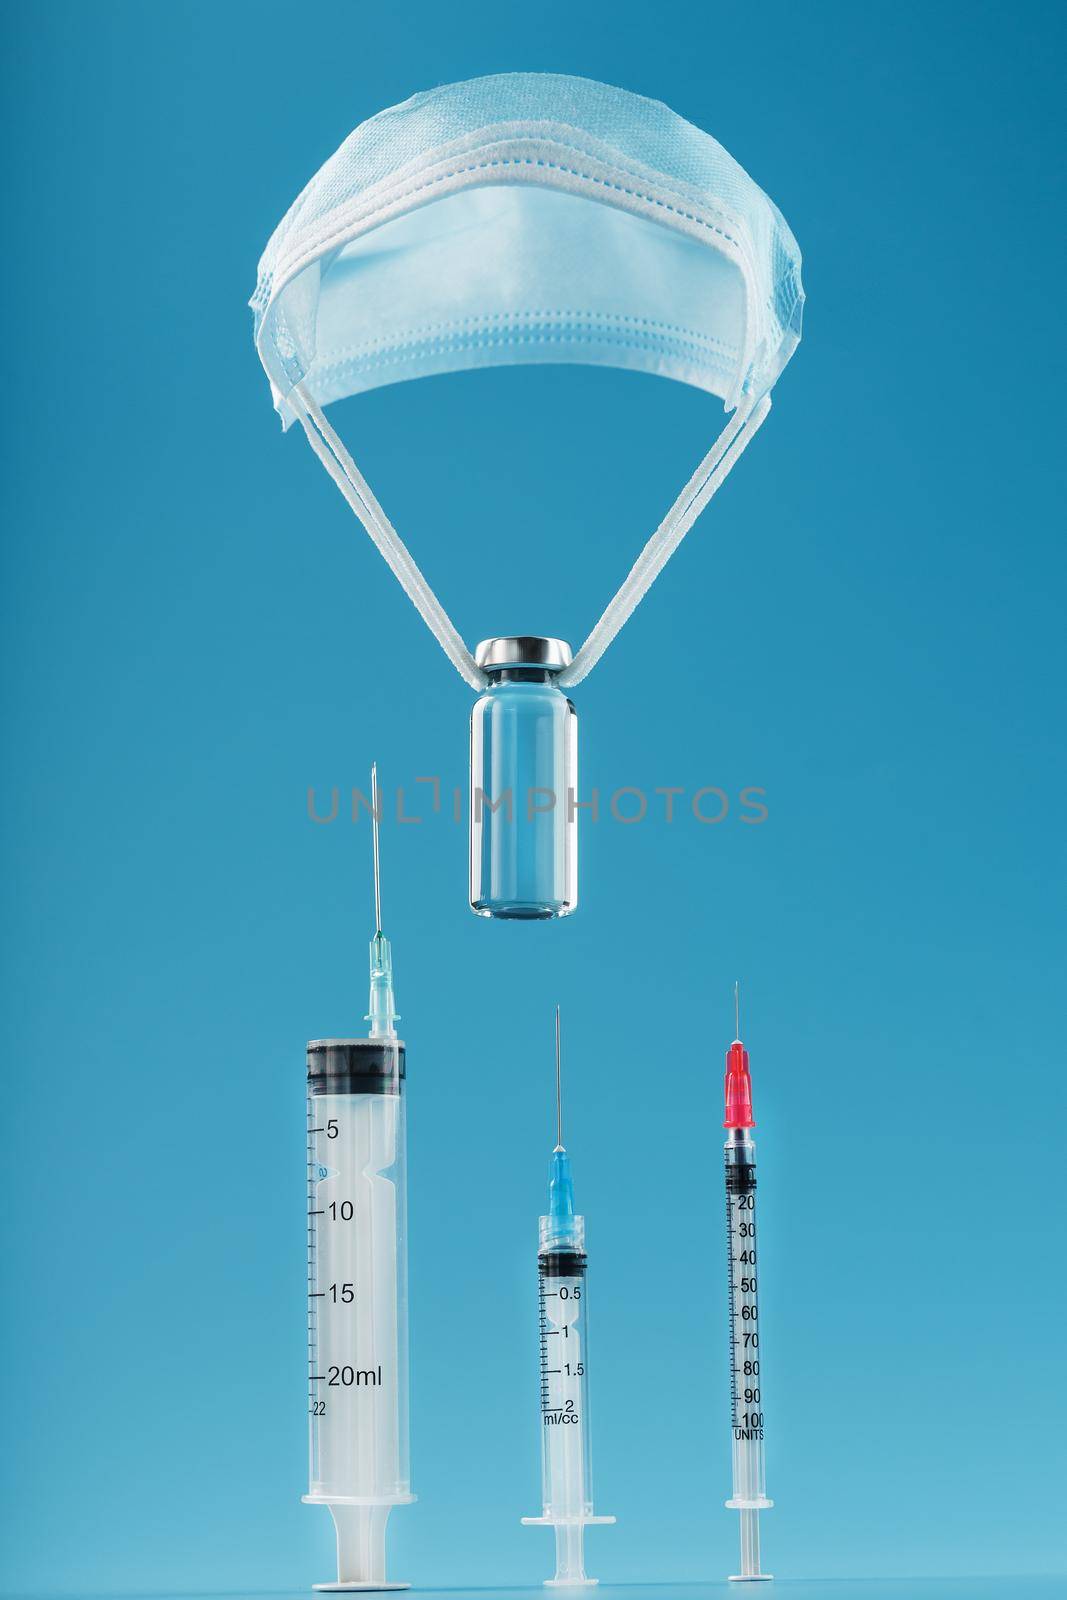 Cure for the virus and disease with syringes on a medical oil scraper on a blue background. COVID-19 anti-virus delivery concept. Antiviral vaccine. Medical ampoules and vials. SARS CoV 2.